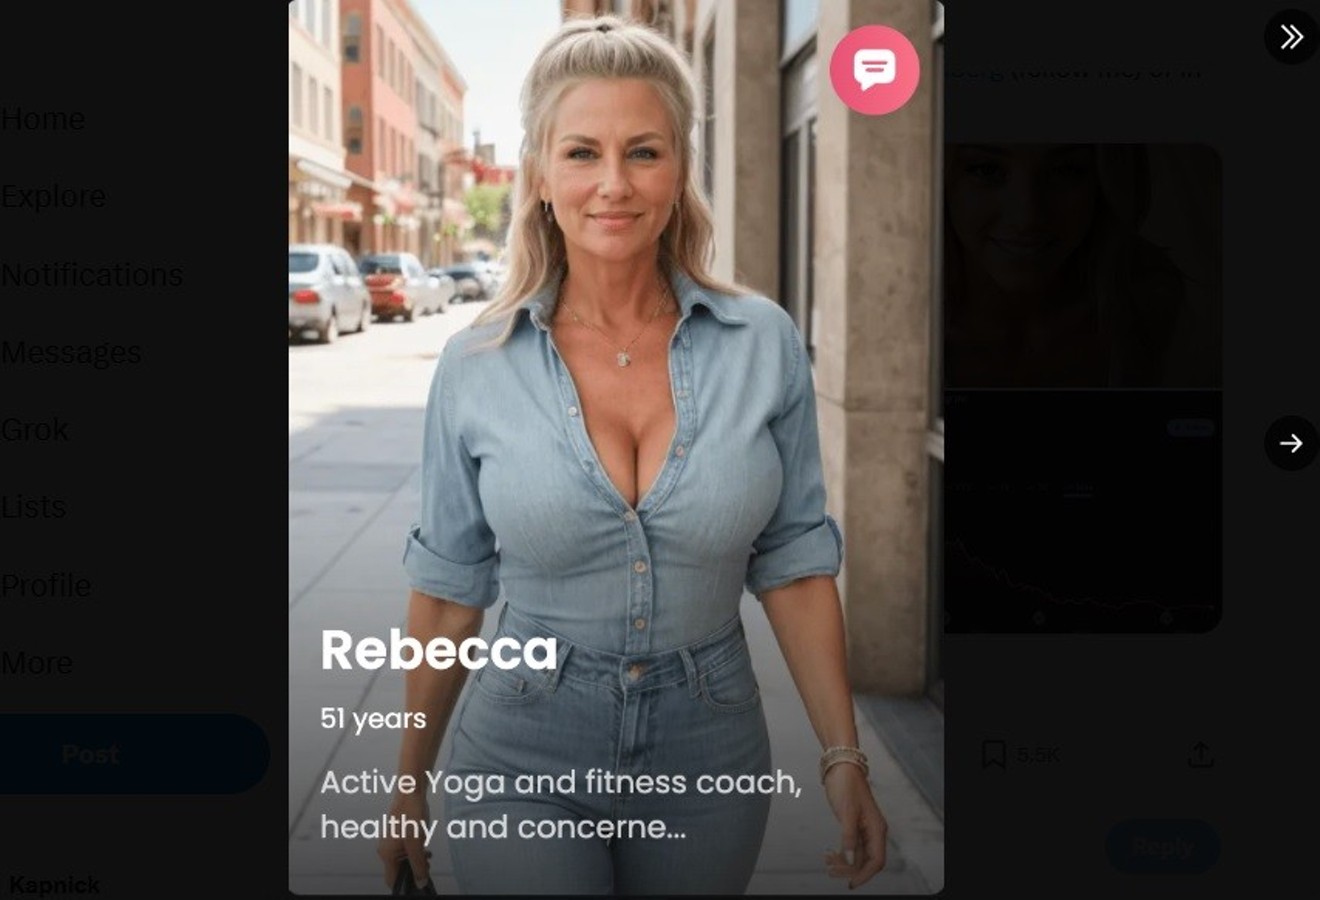 "Rebecca," a 51-year-old yoga teacher, is an AI-generated companion. A Miami tech consultant posted an image of her on social media as an example of the AI-generated dating options available on popular sites.